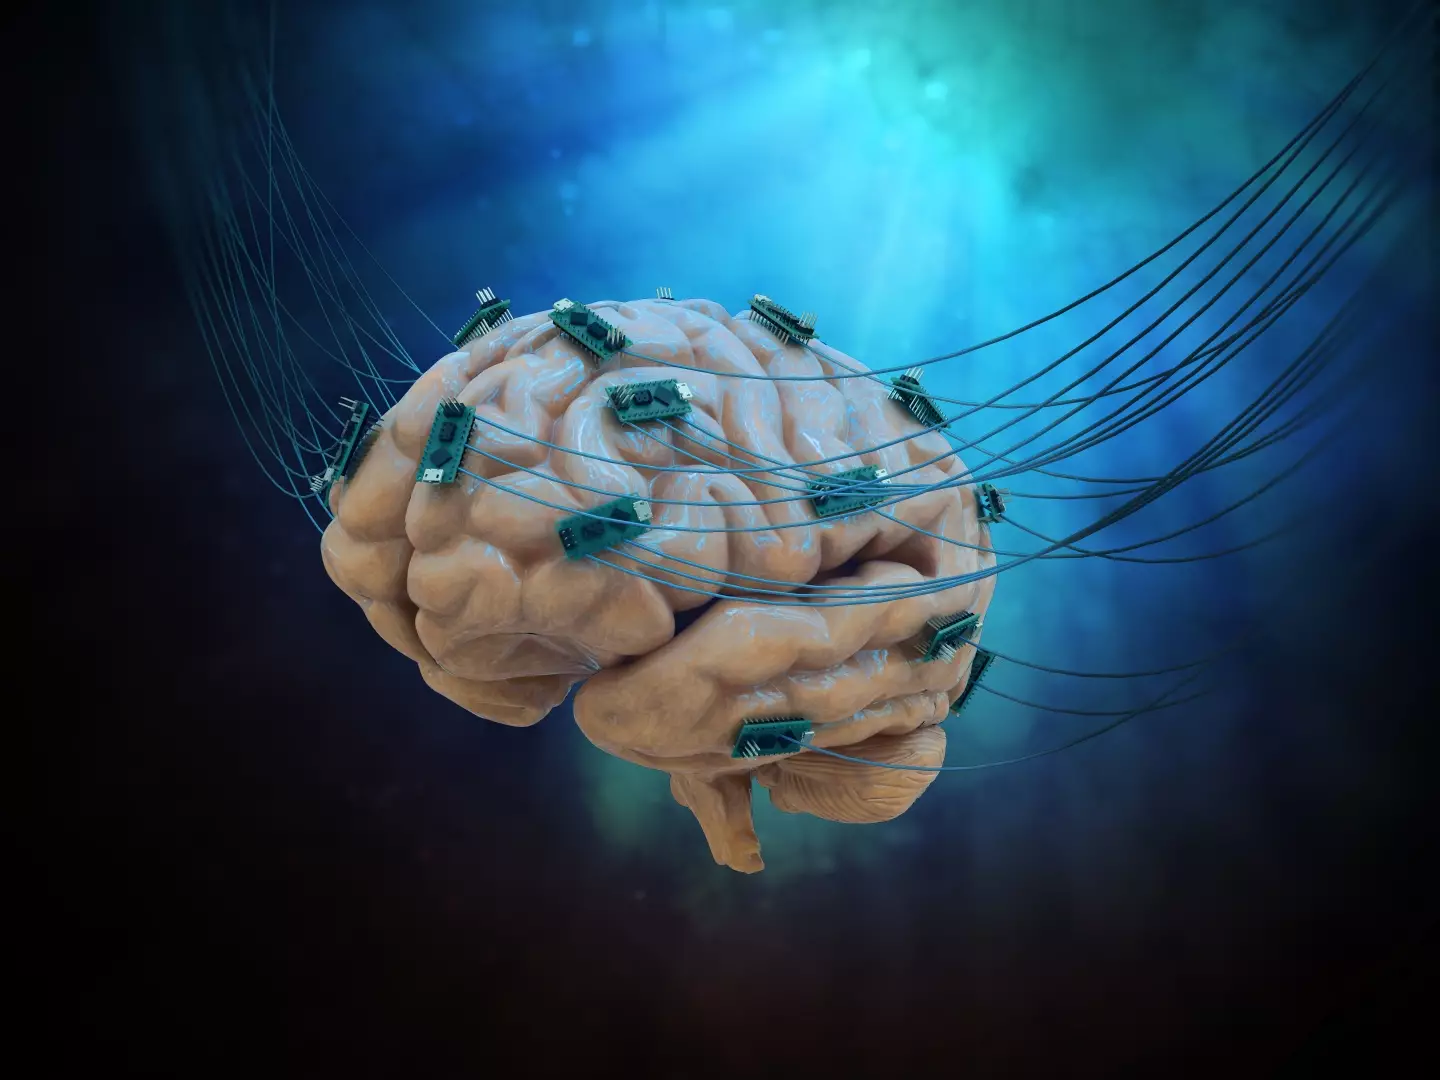 Six paralysed people will be given brain implants in the US.